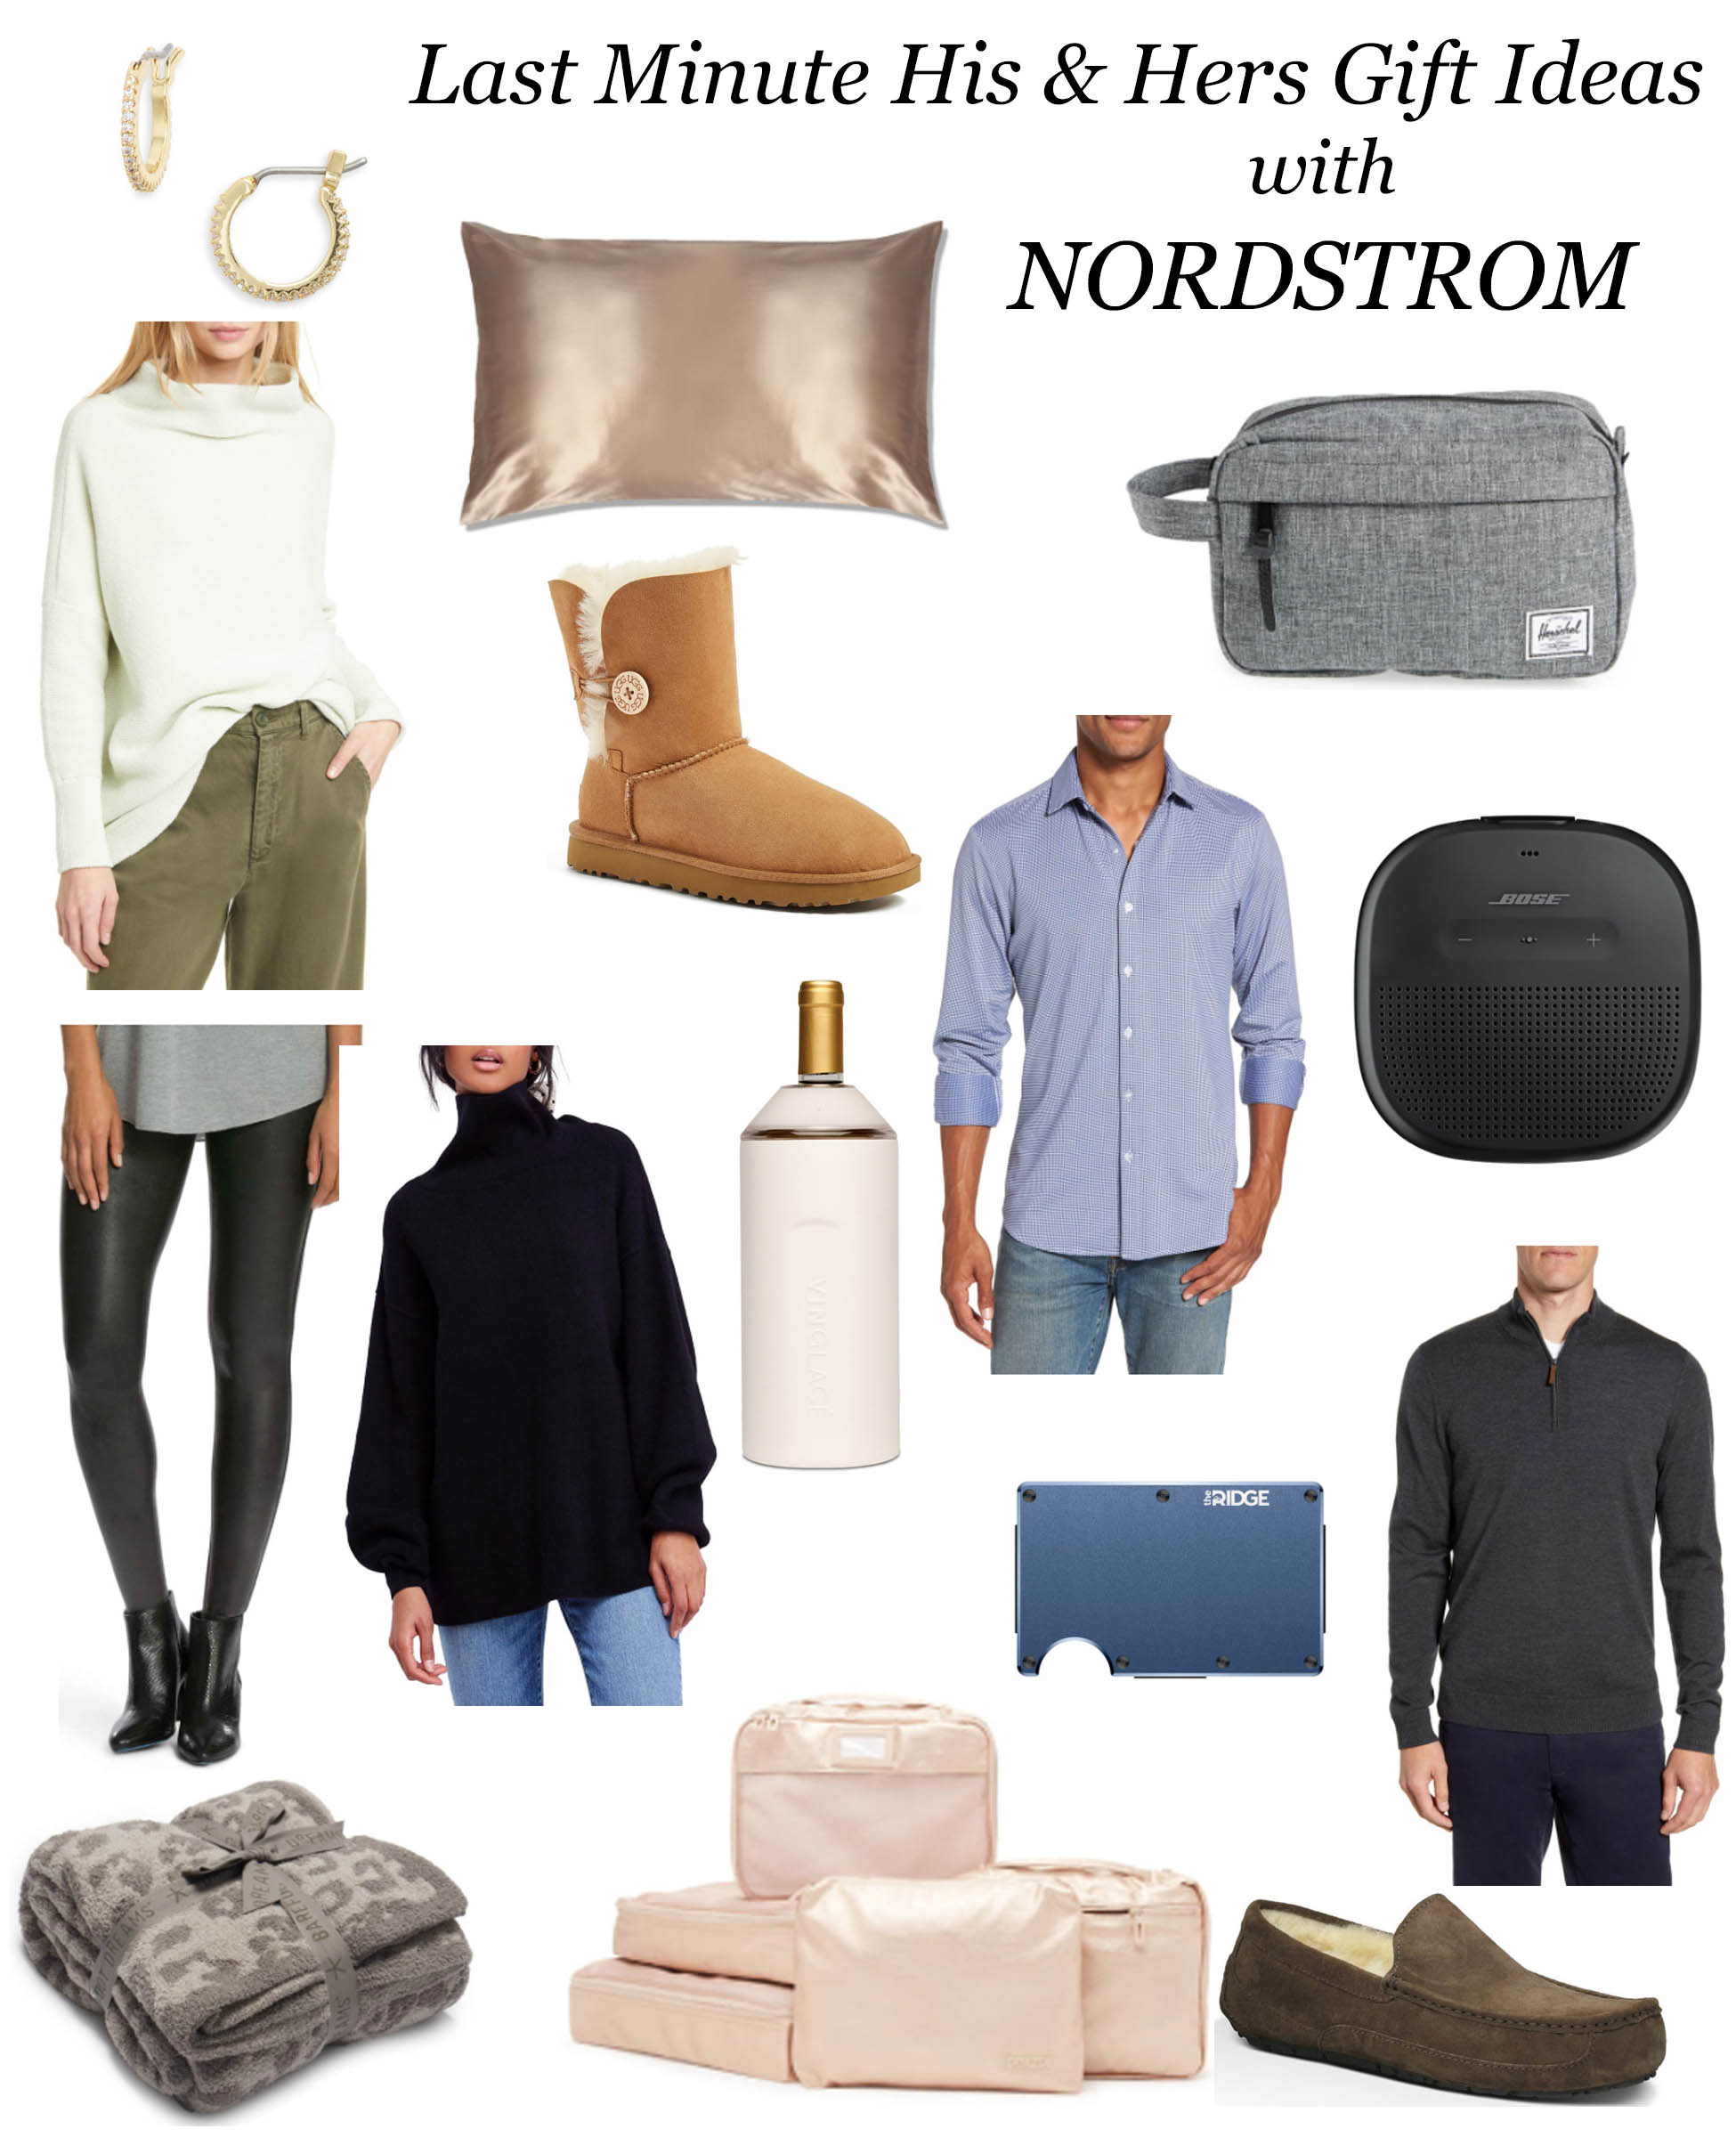 Nordstrom Gifts